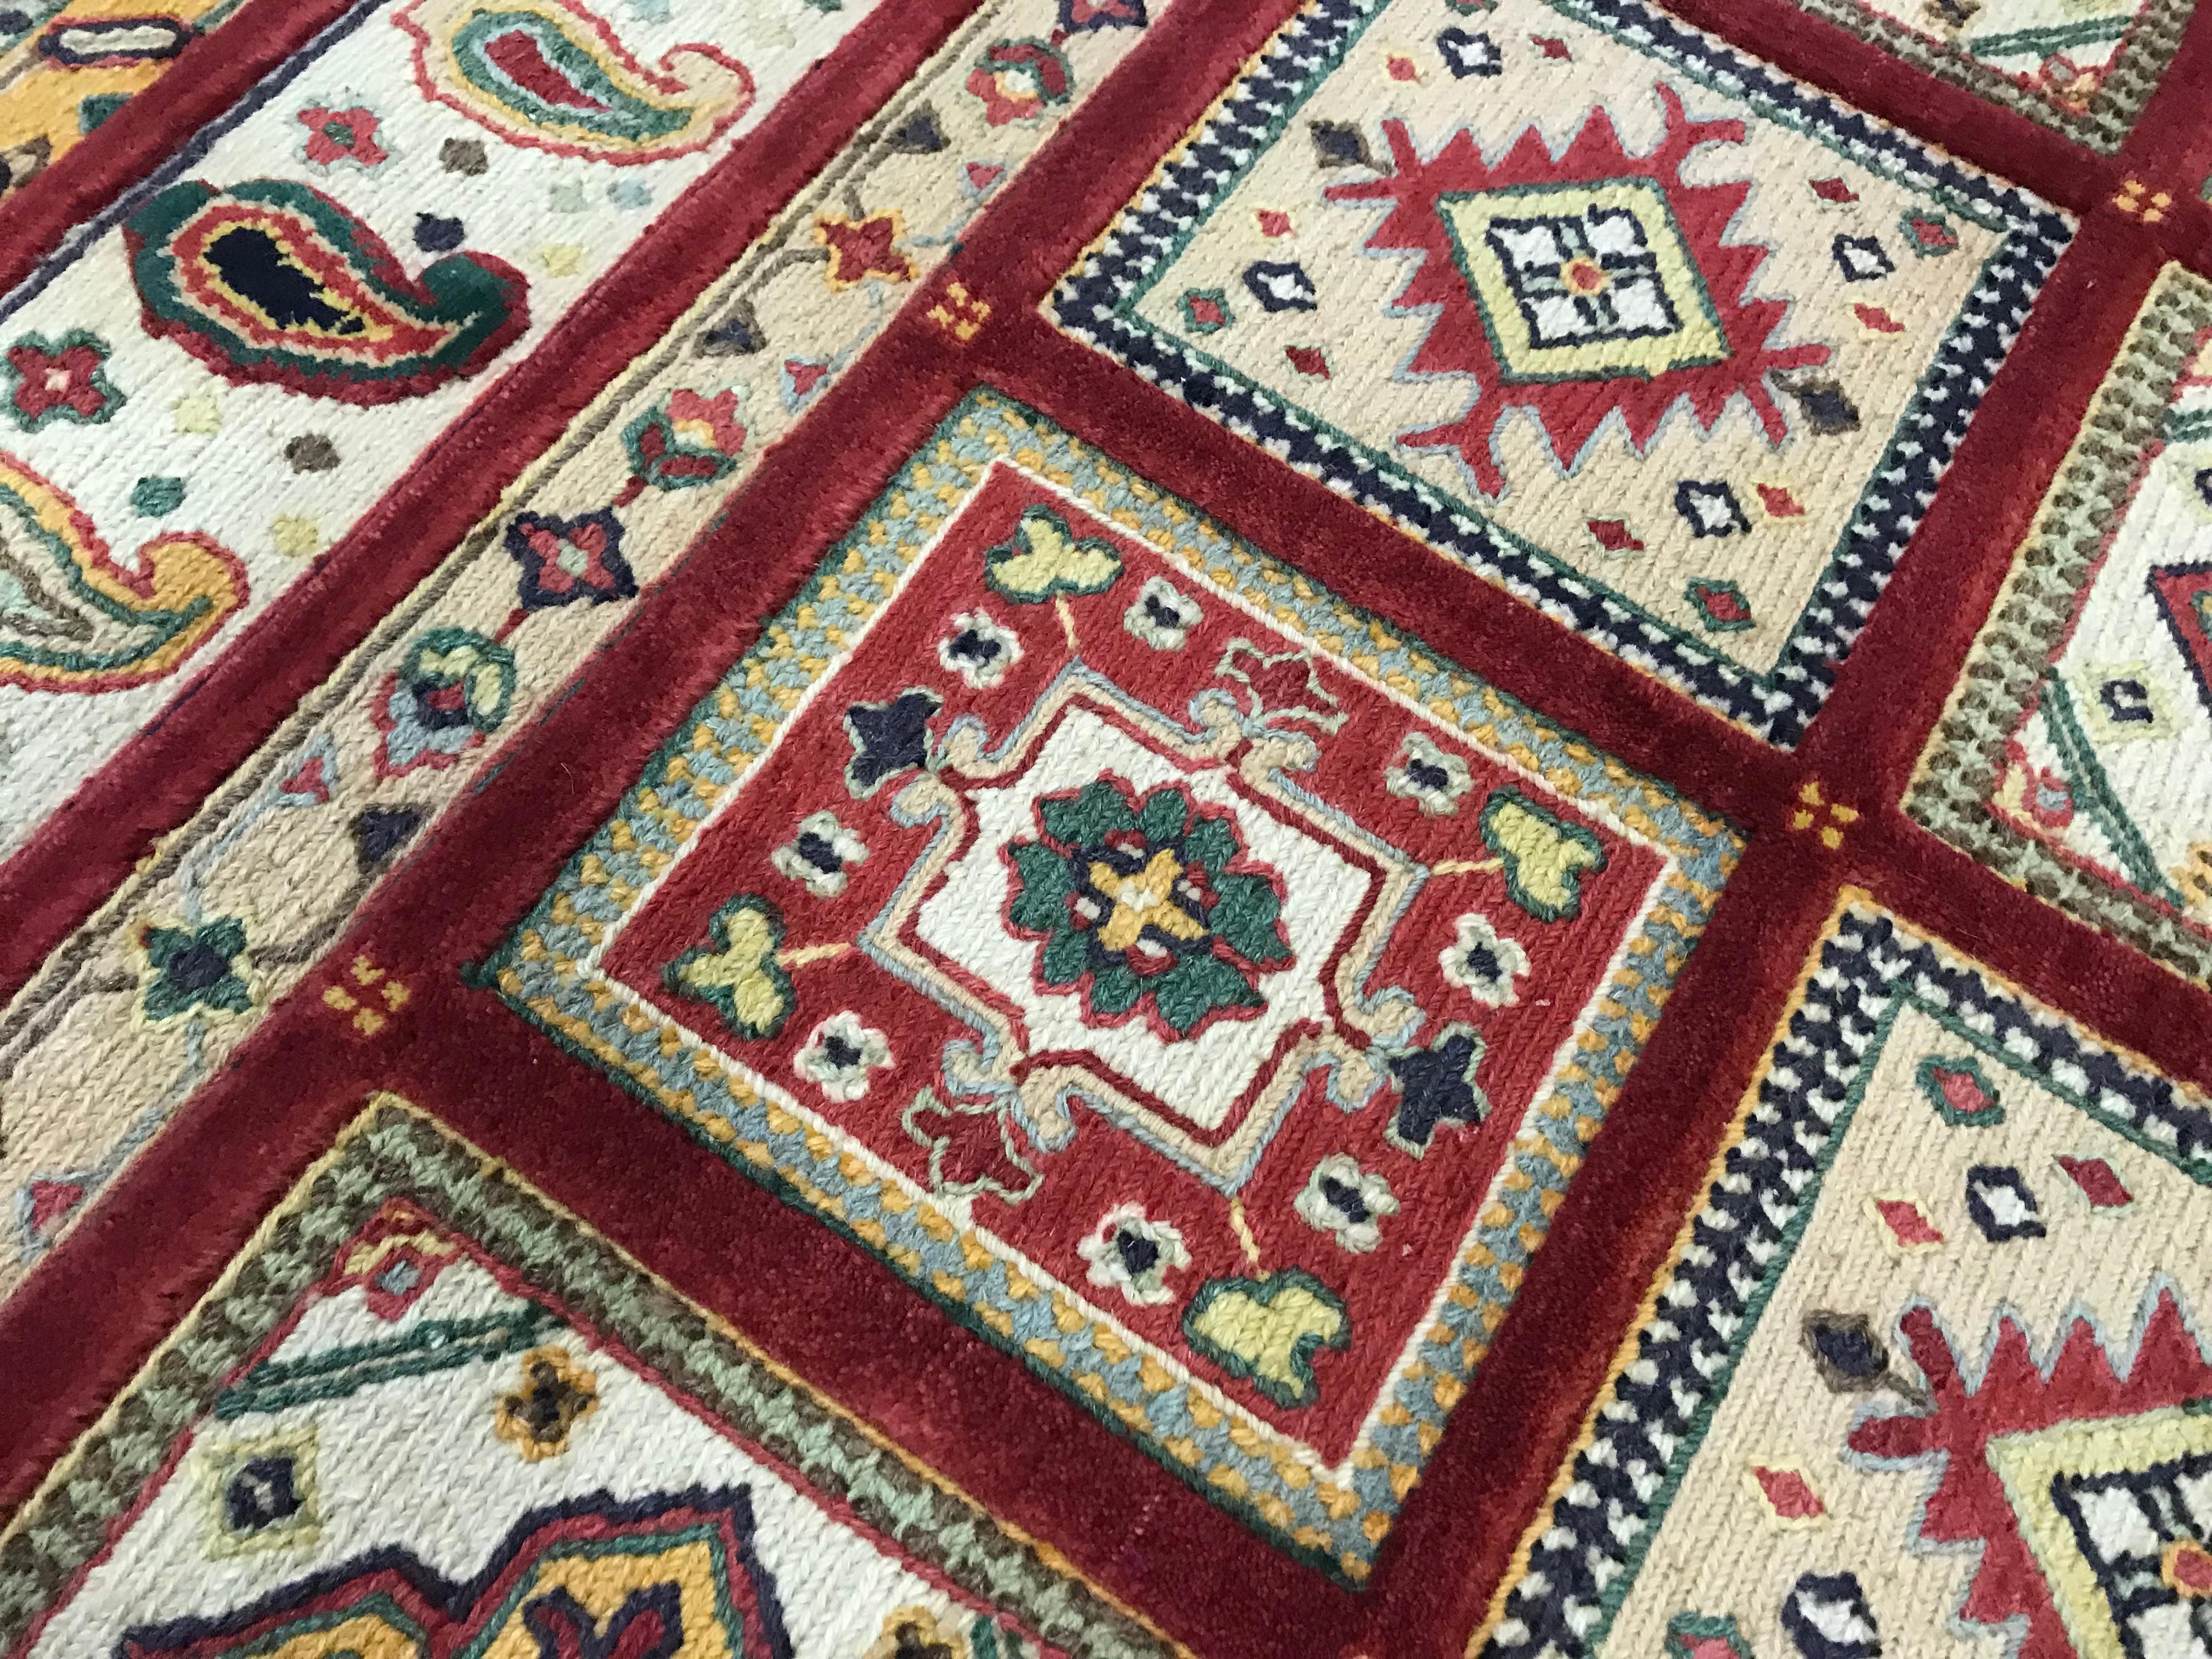 4 x 6 area rugs